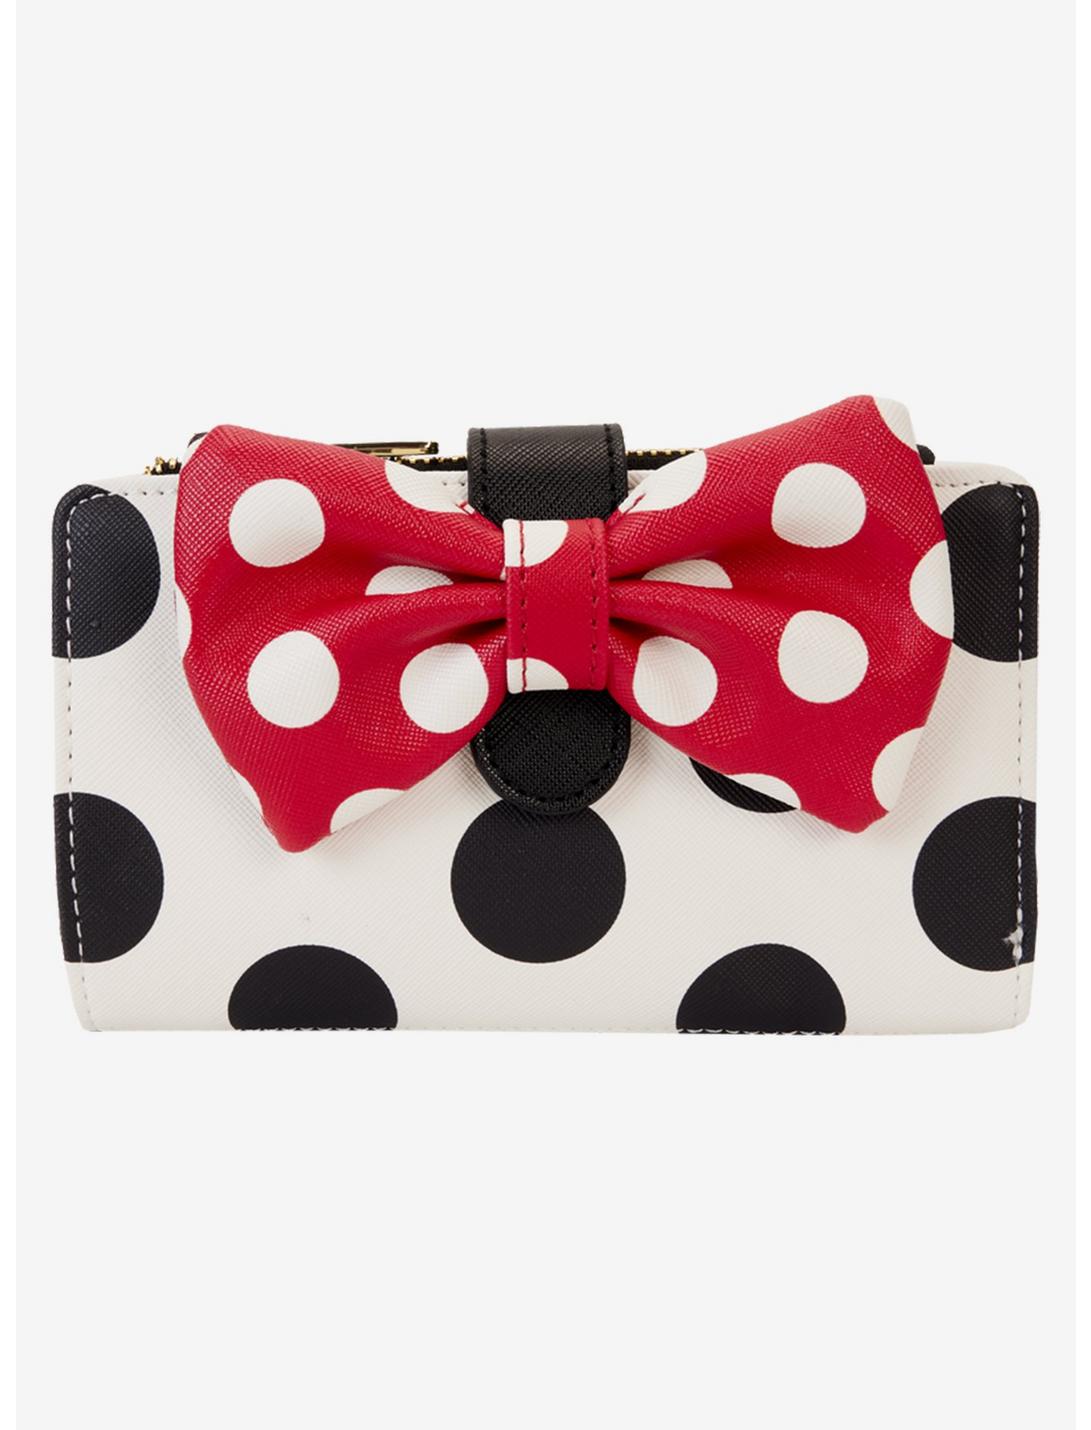 Loungefly Disney Minnie Mouse Polka Dot Bow Wallet, , hi-res